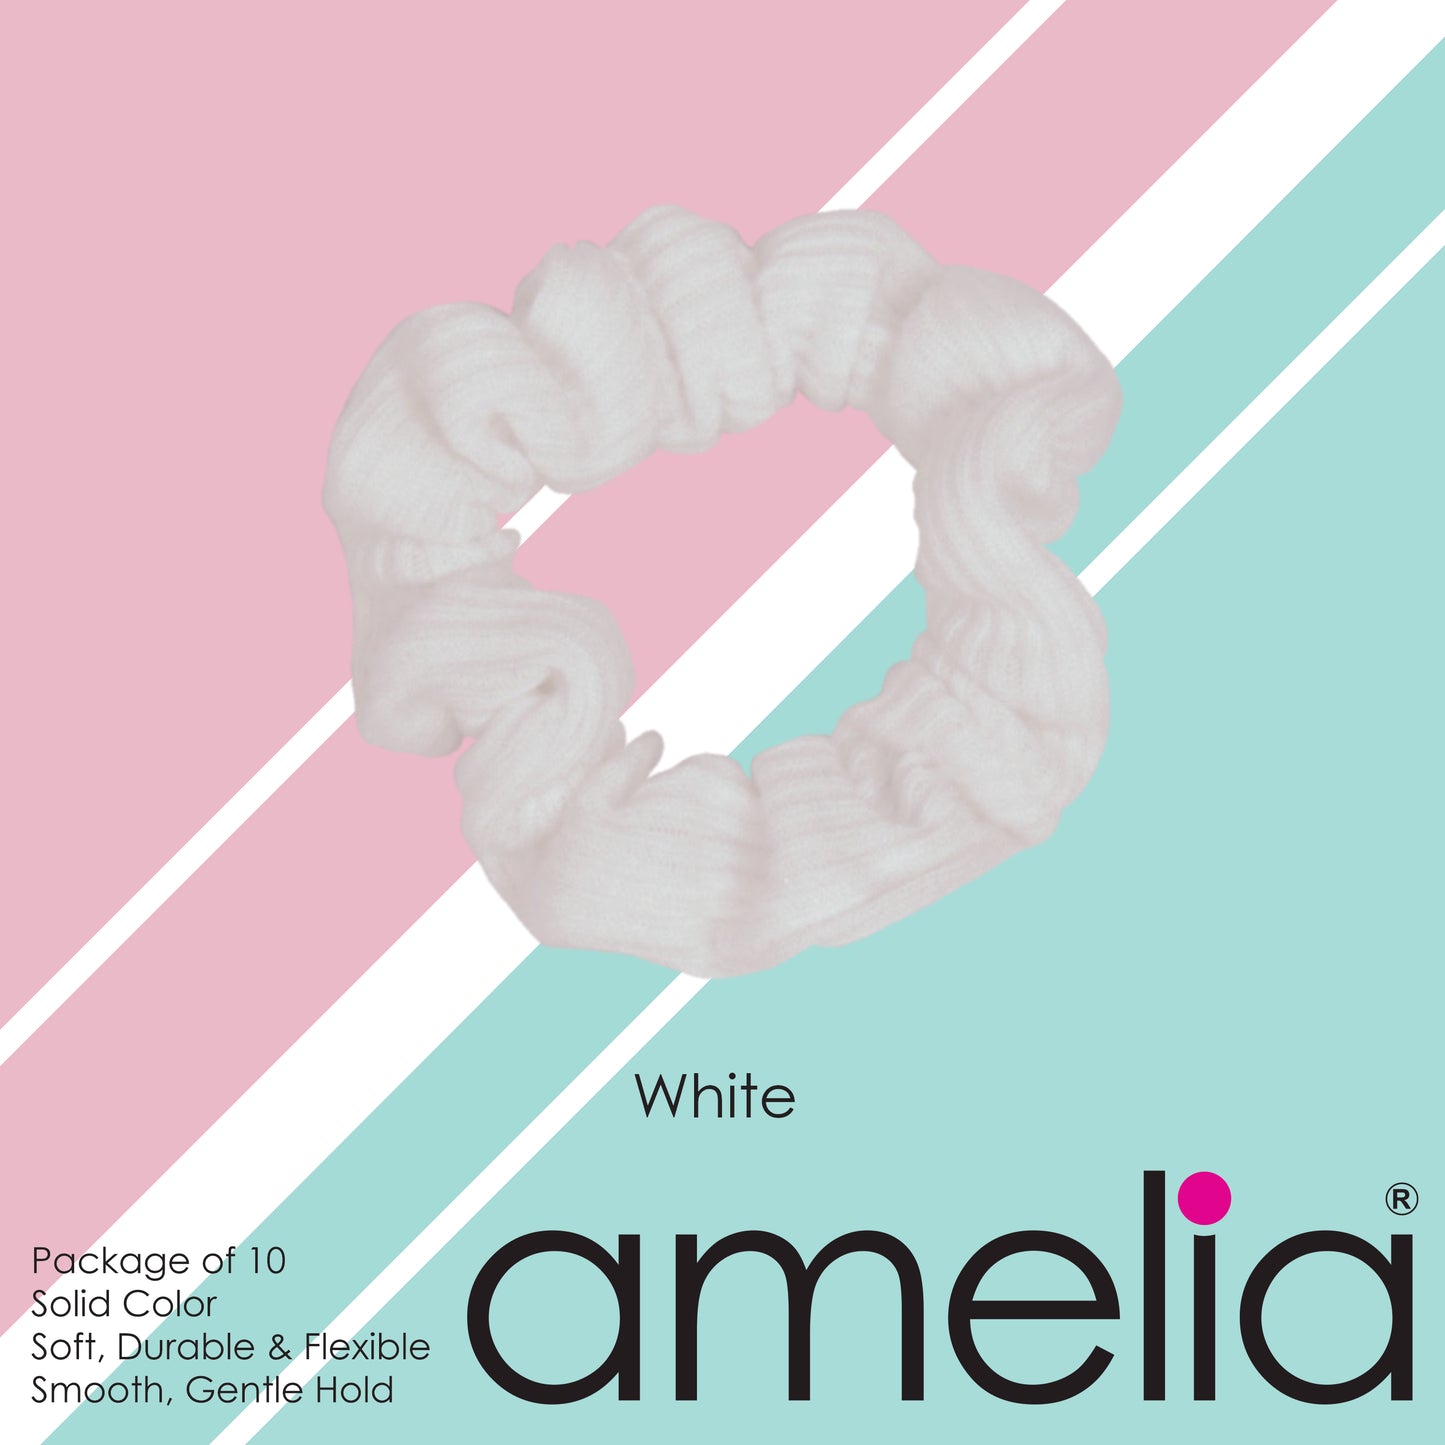 Amelia Beauty, Medium White Ribbed Scrunchies, 2.5in Diameter, Gentle on Hair, Strong Hold, No Snag, No Dents or Creases. 10 Pack